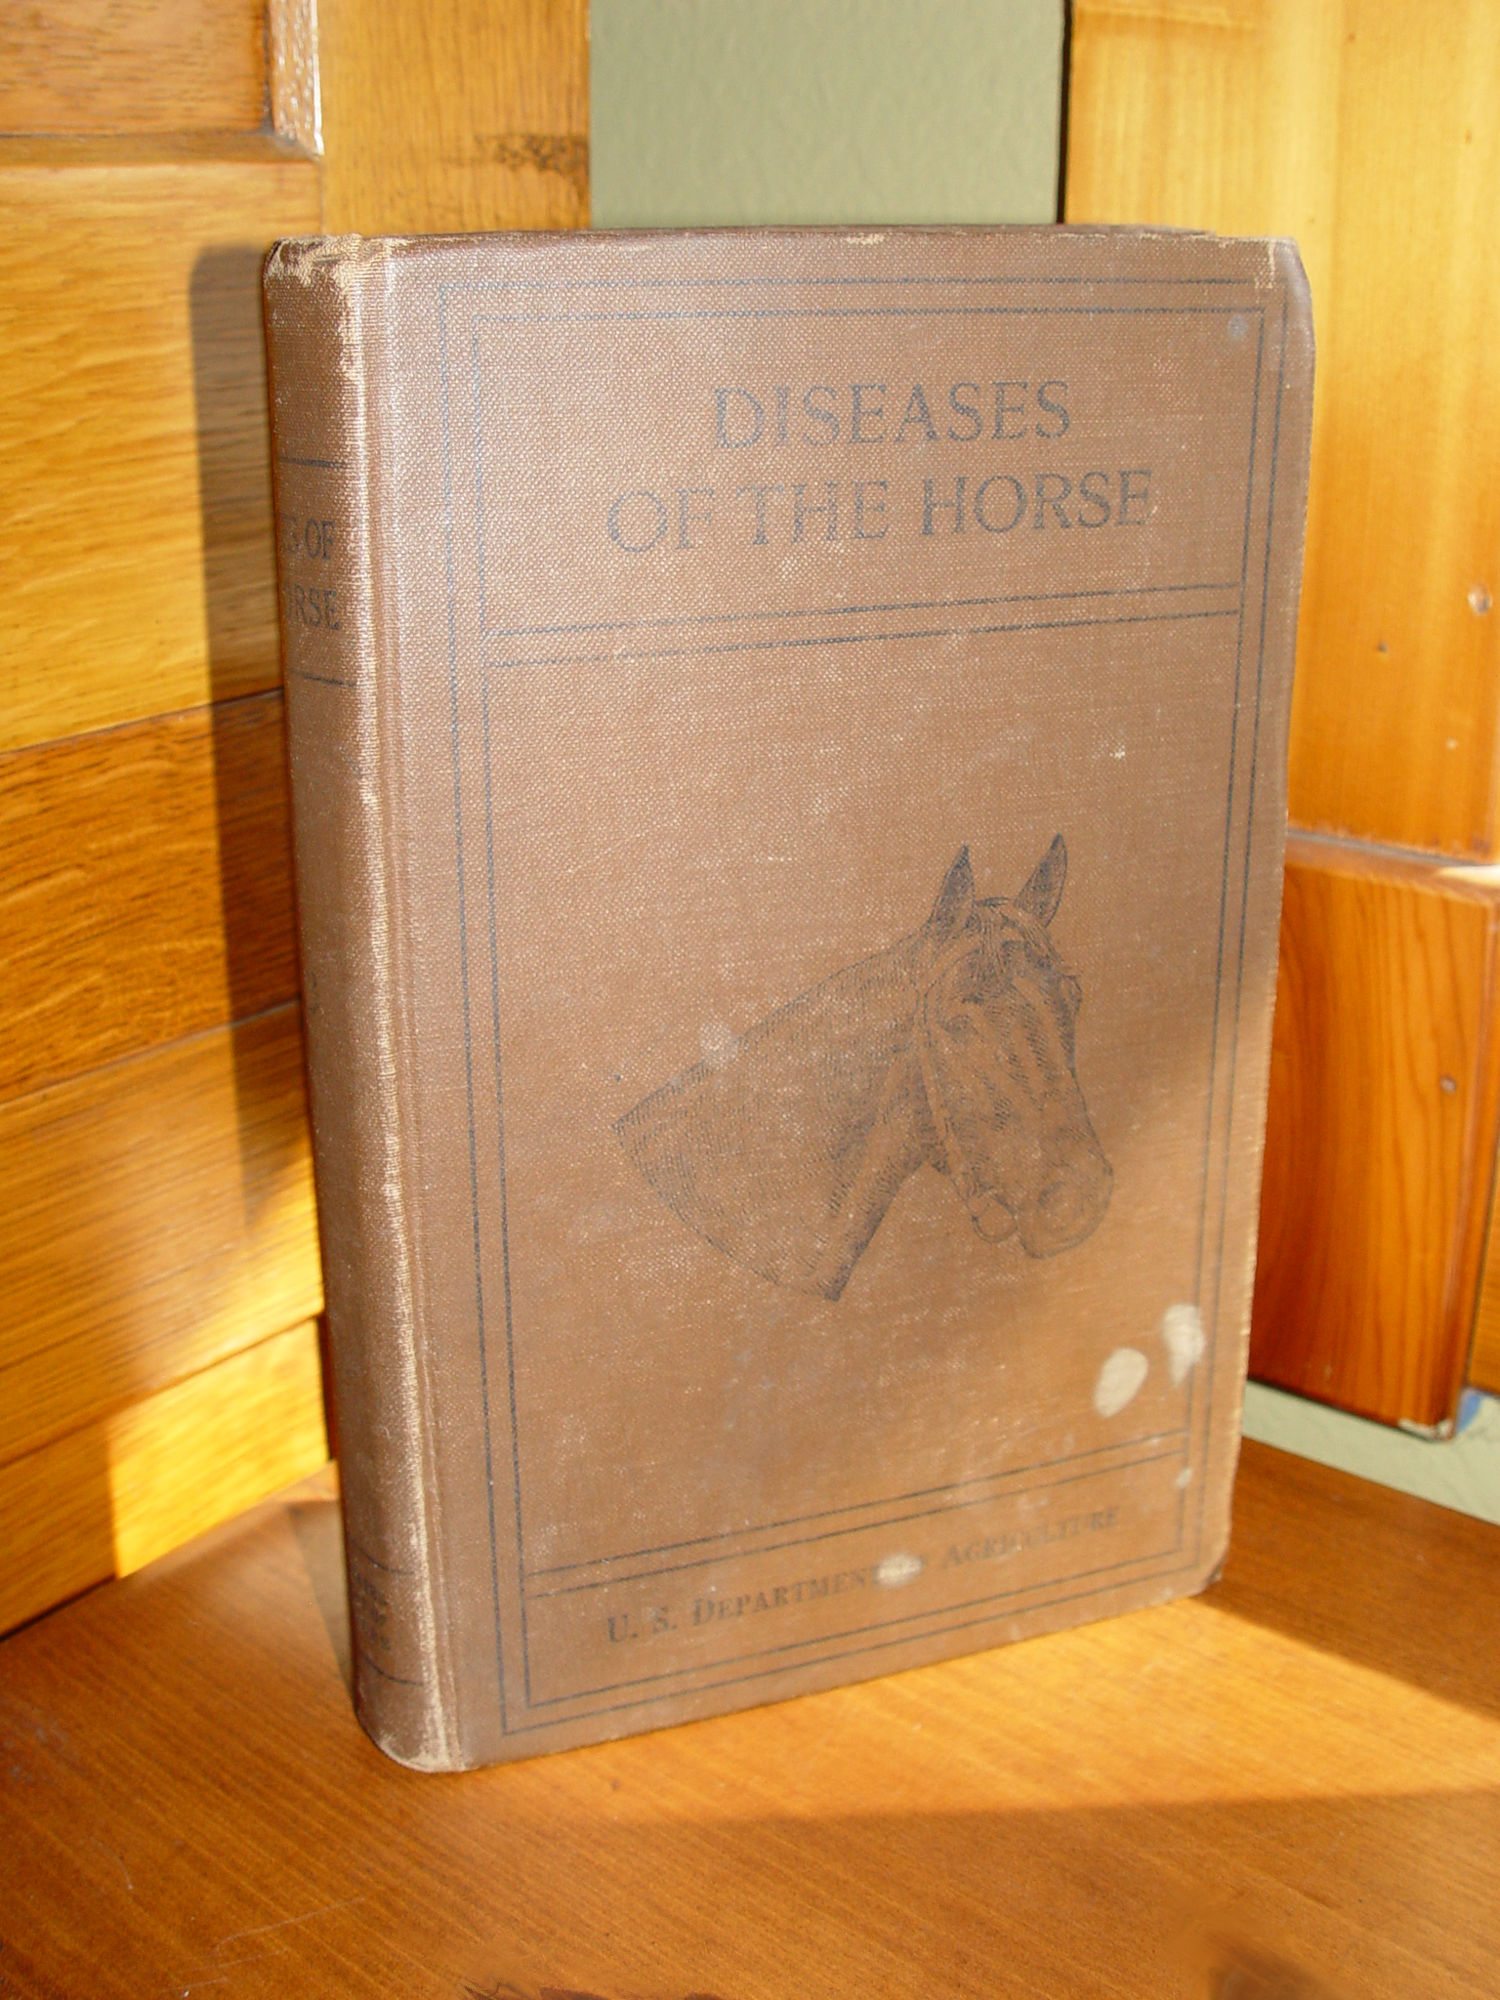 Special Report on Diseases of the Horse
                        1907, Dept. of Agriculture